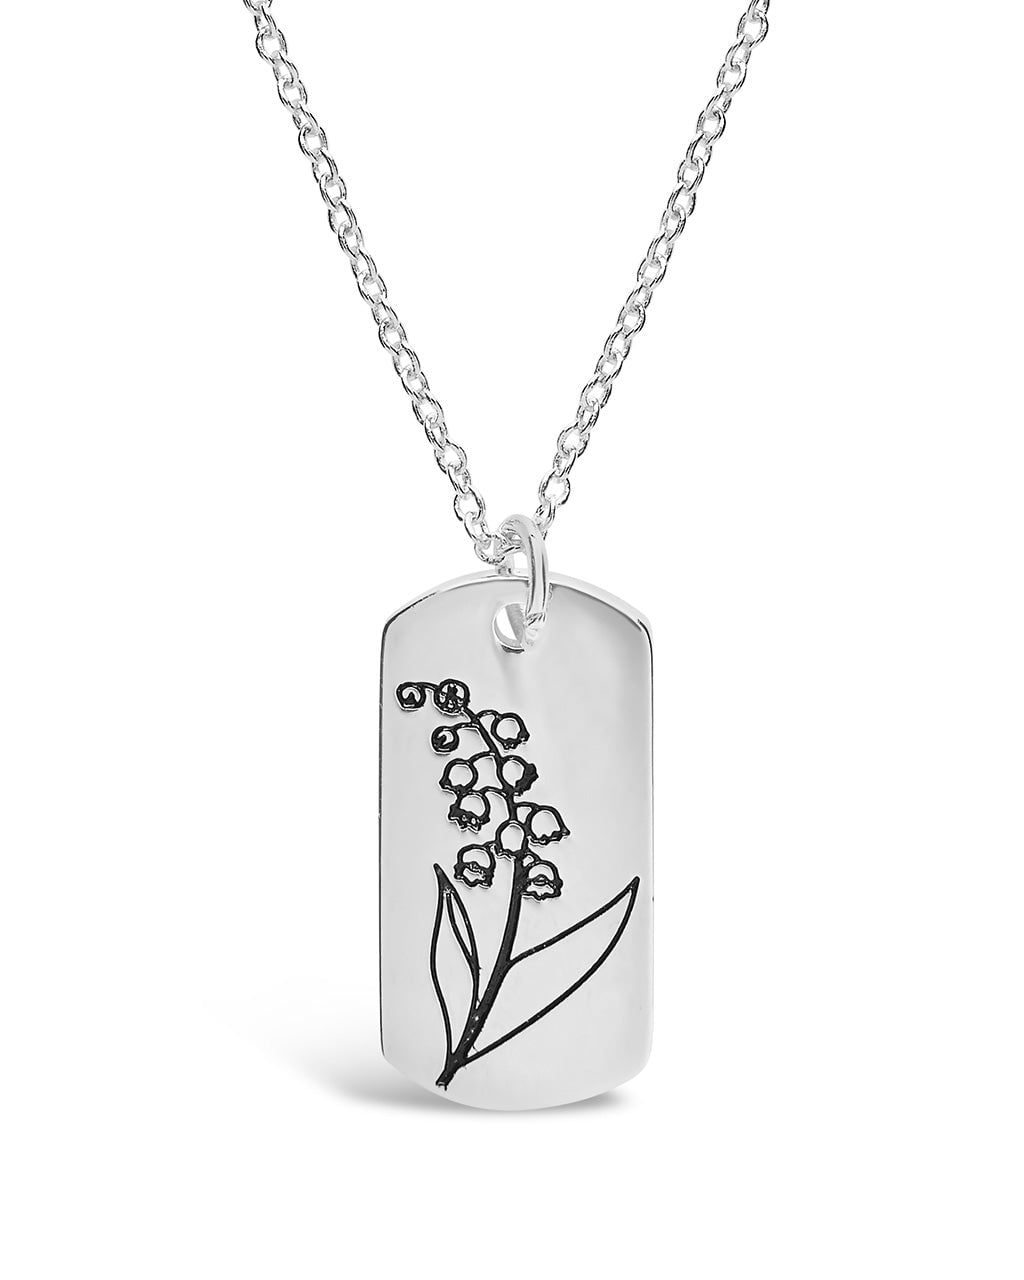 Birth Flower Pendant Necklace Sterling Forever Silver May / Lily of the Valley 